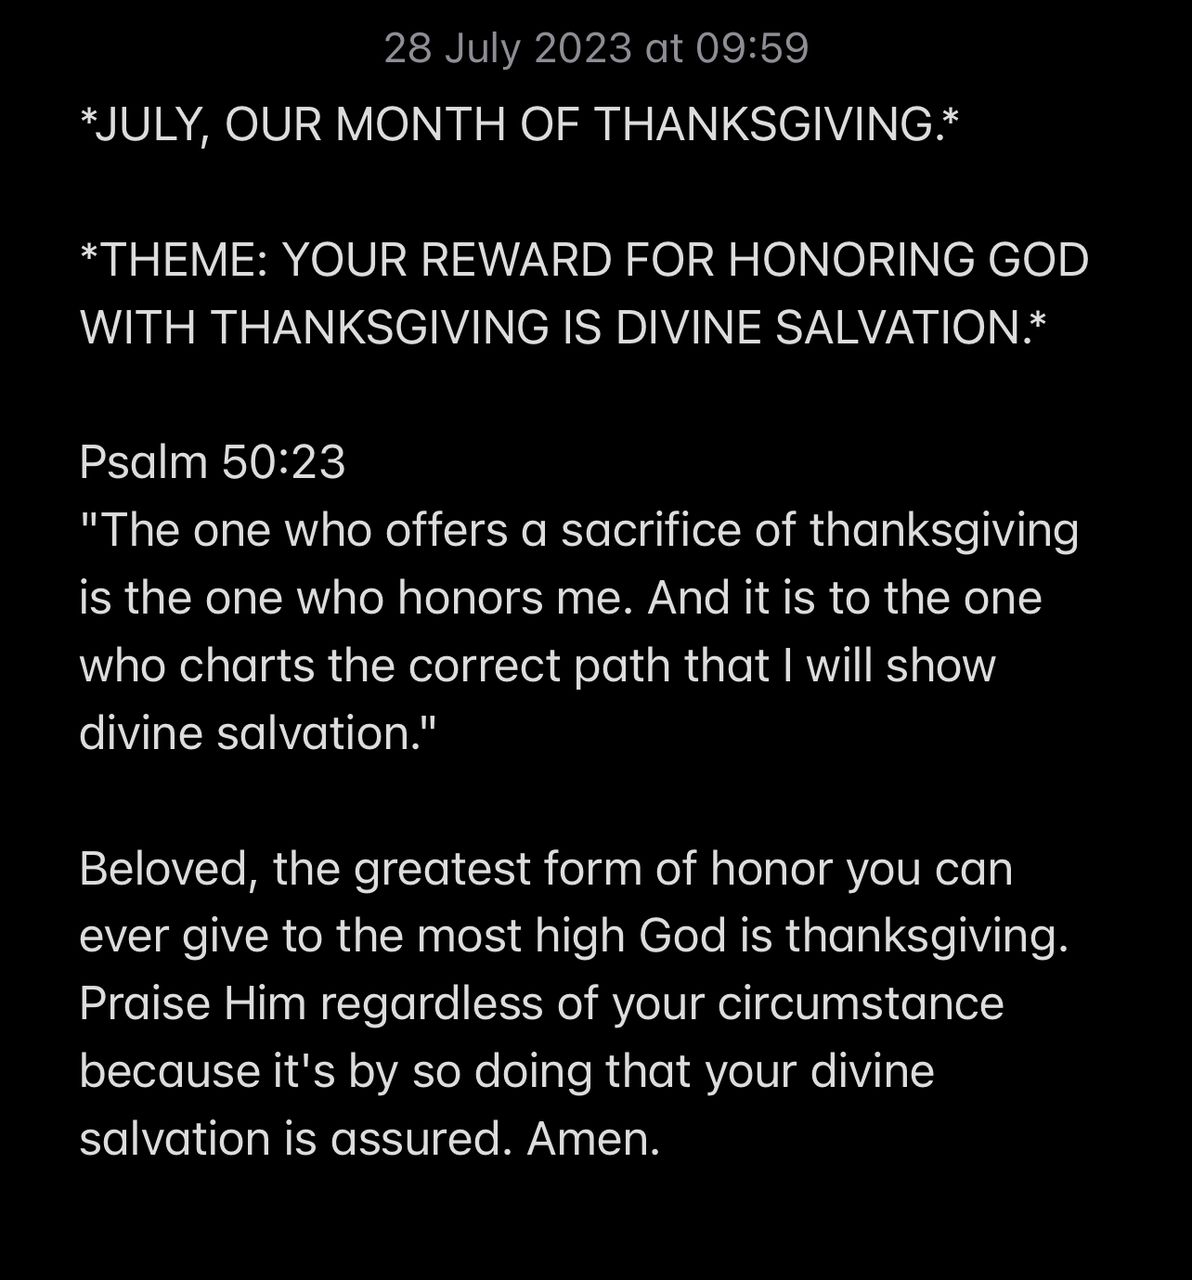 YOUR REWARD FOR HONORING GOD WITH THANKSGIVING IS DIVINE SALVATION.